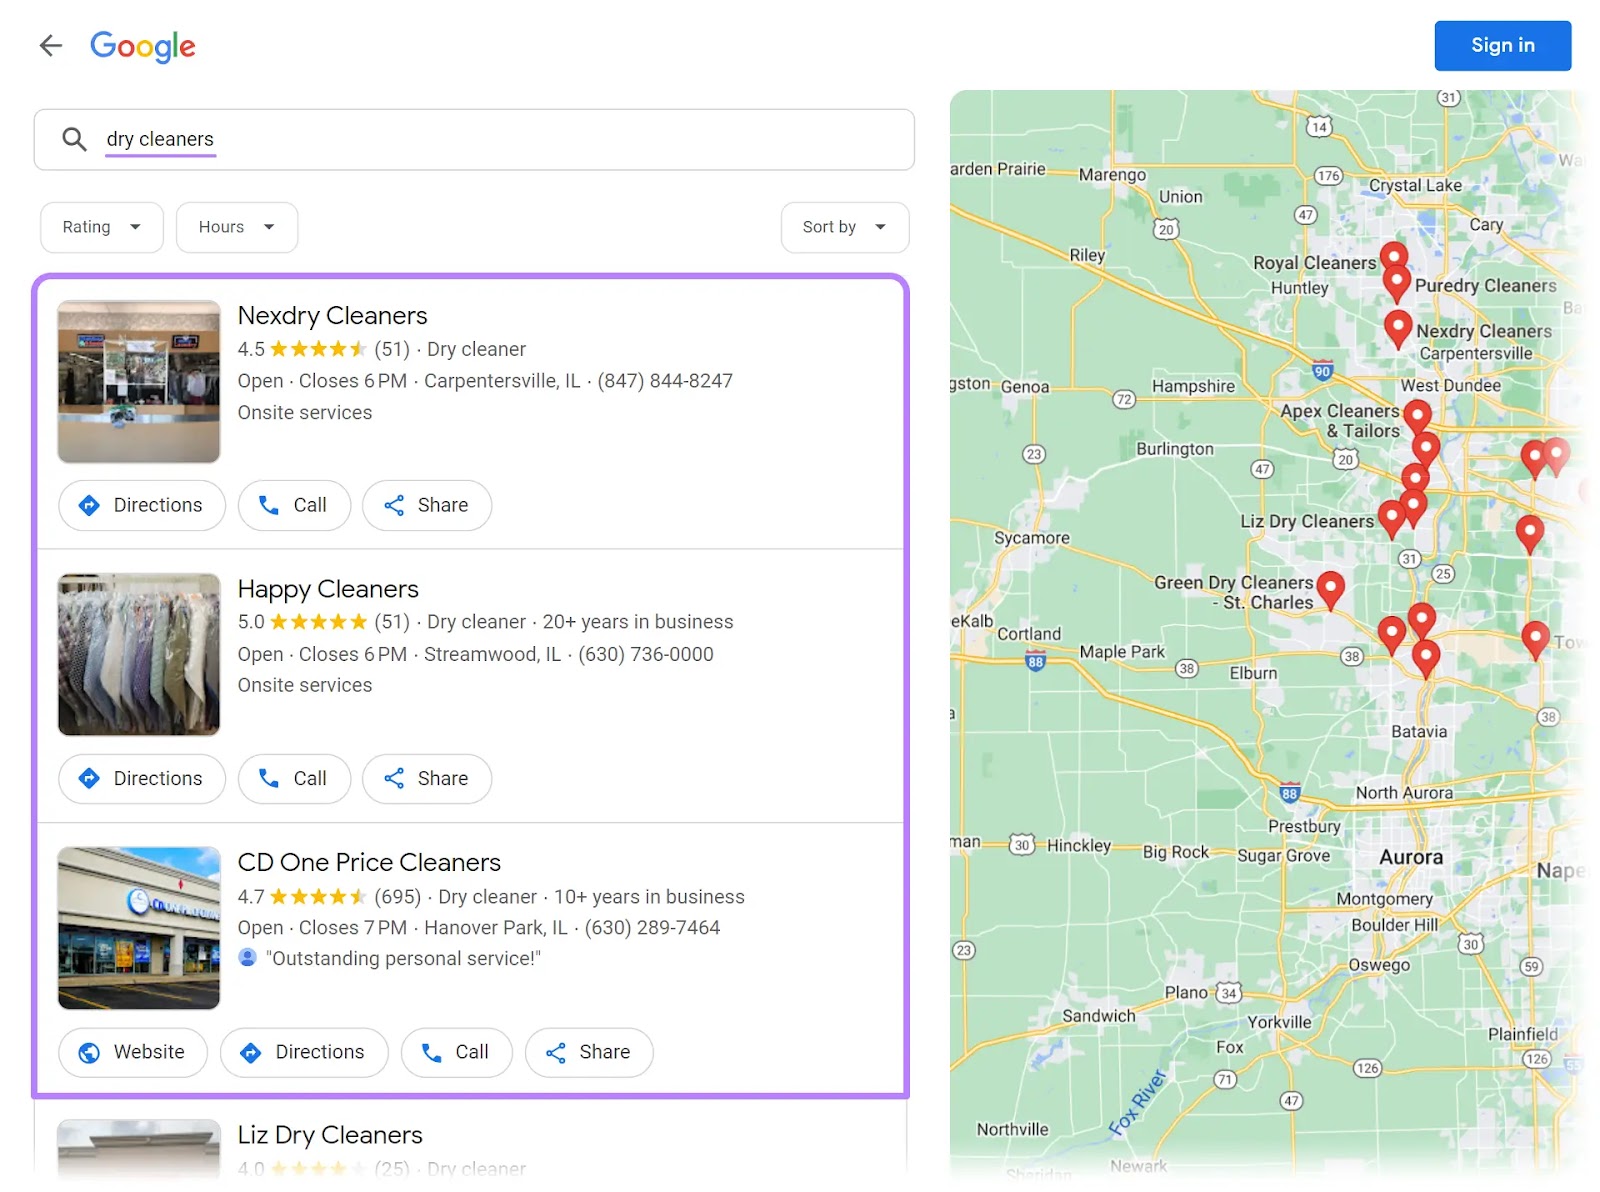 Google Maps results for "dry cleaners"